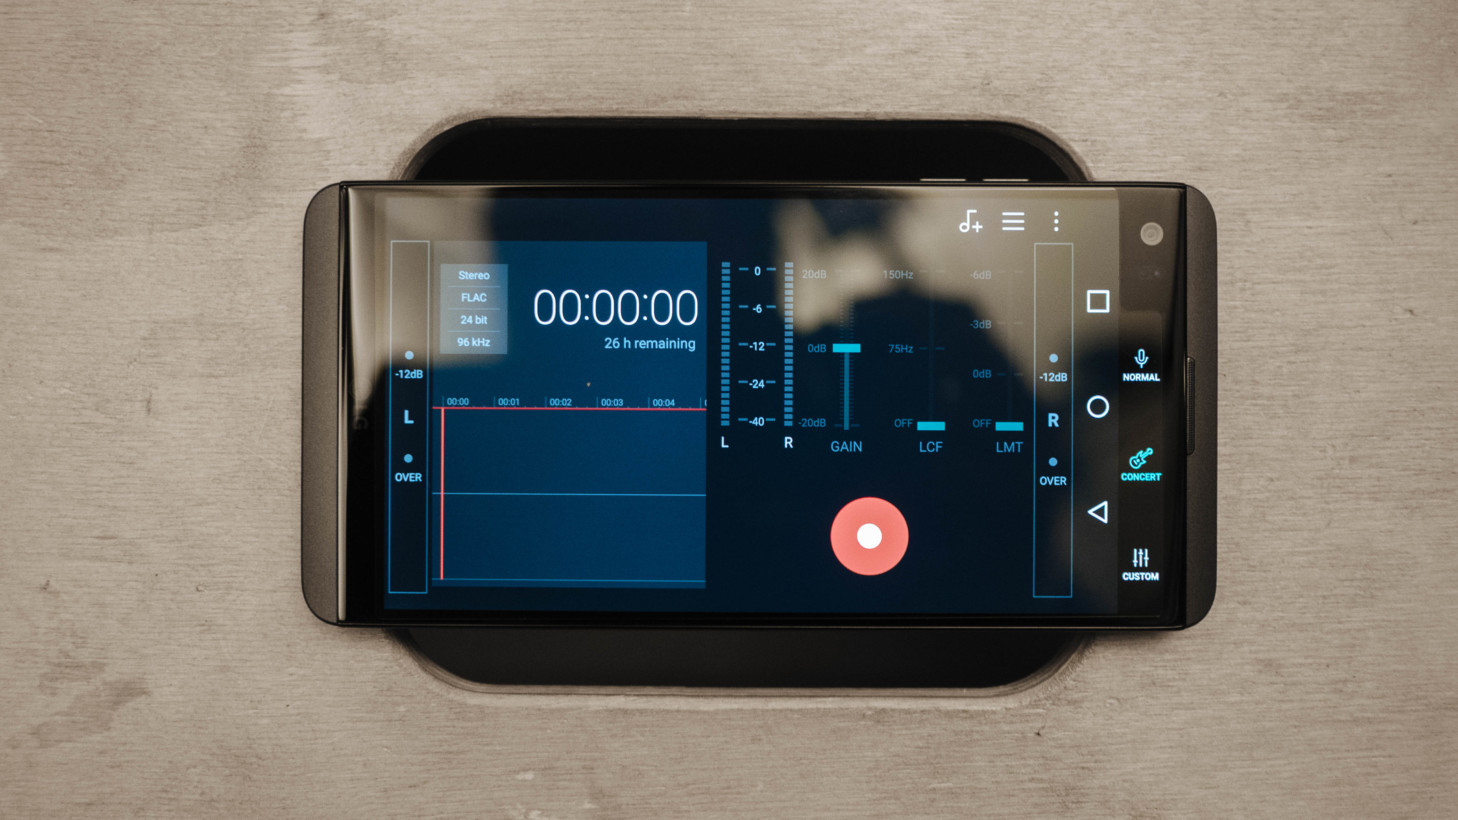 The V20 comes with some powerful recording tools.